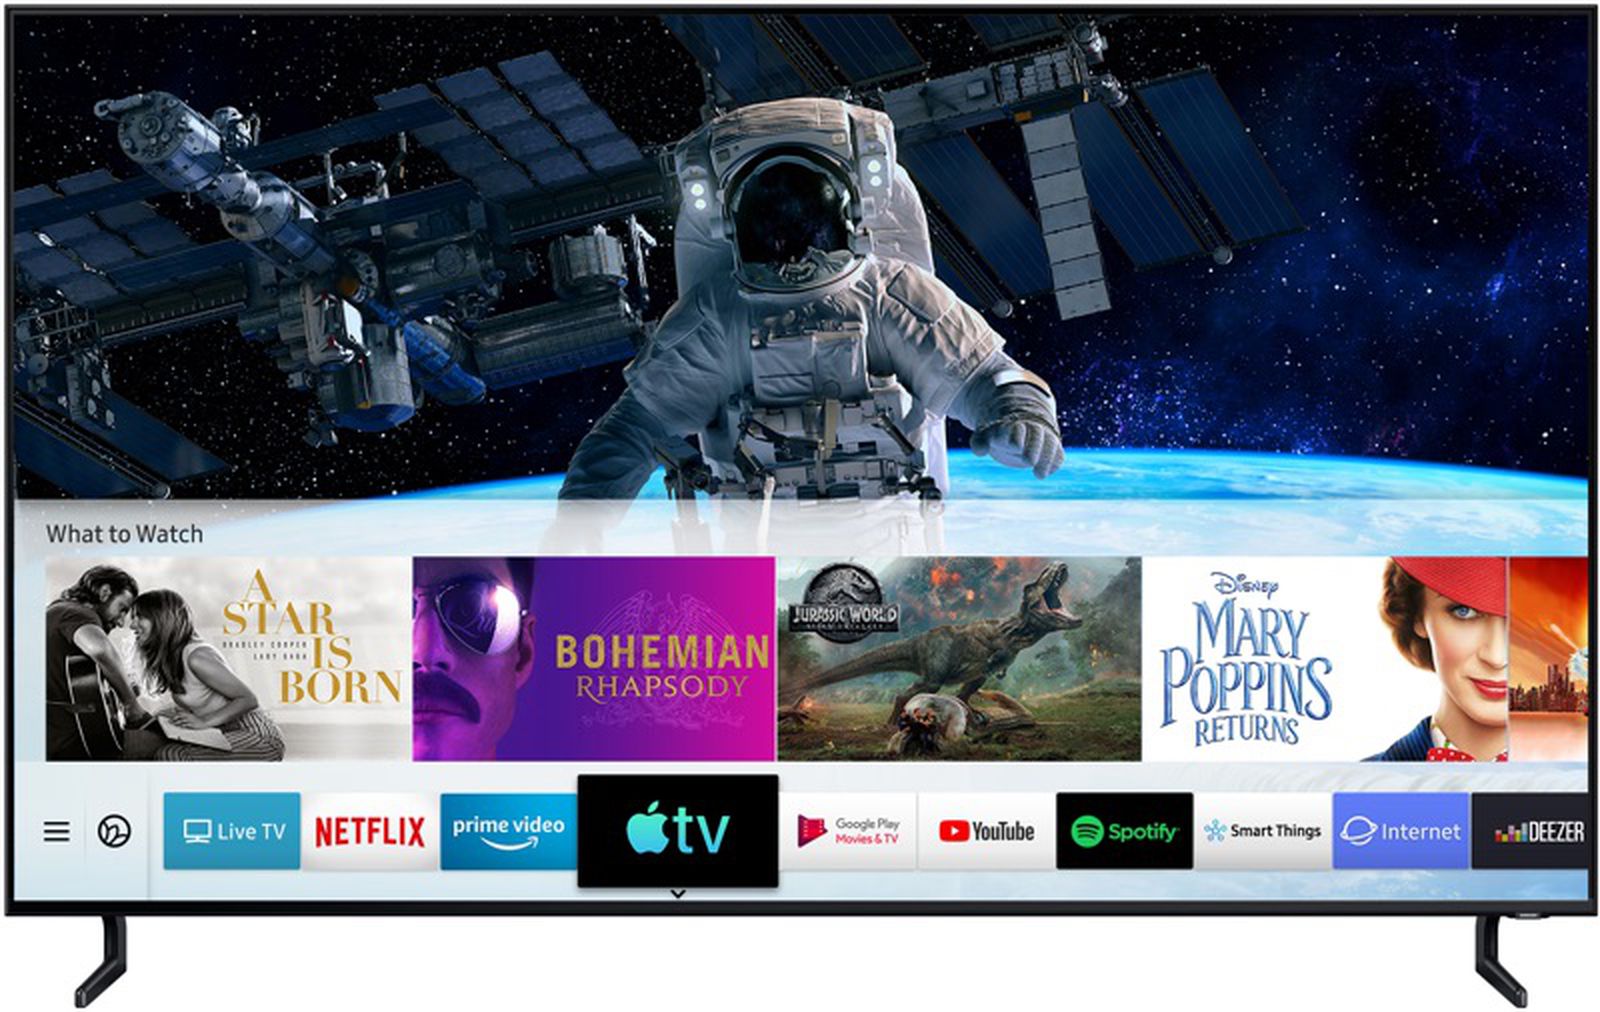 Smuk Trafikprop bunke AirPlay 2 and TV App Now Available on Samsung Smart TVs - MacRumors